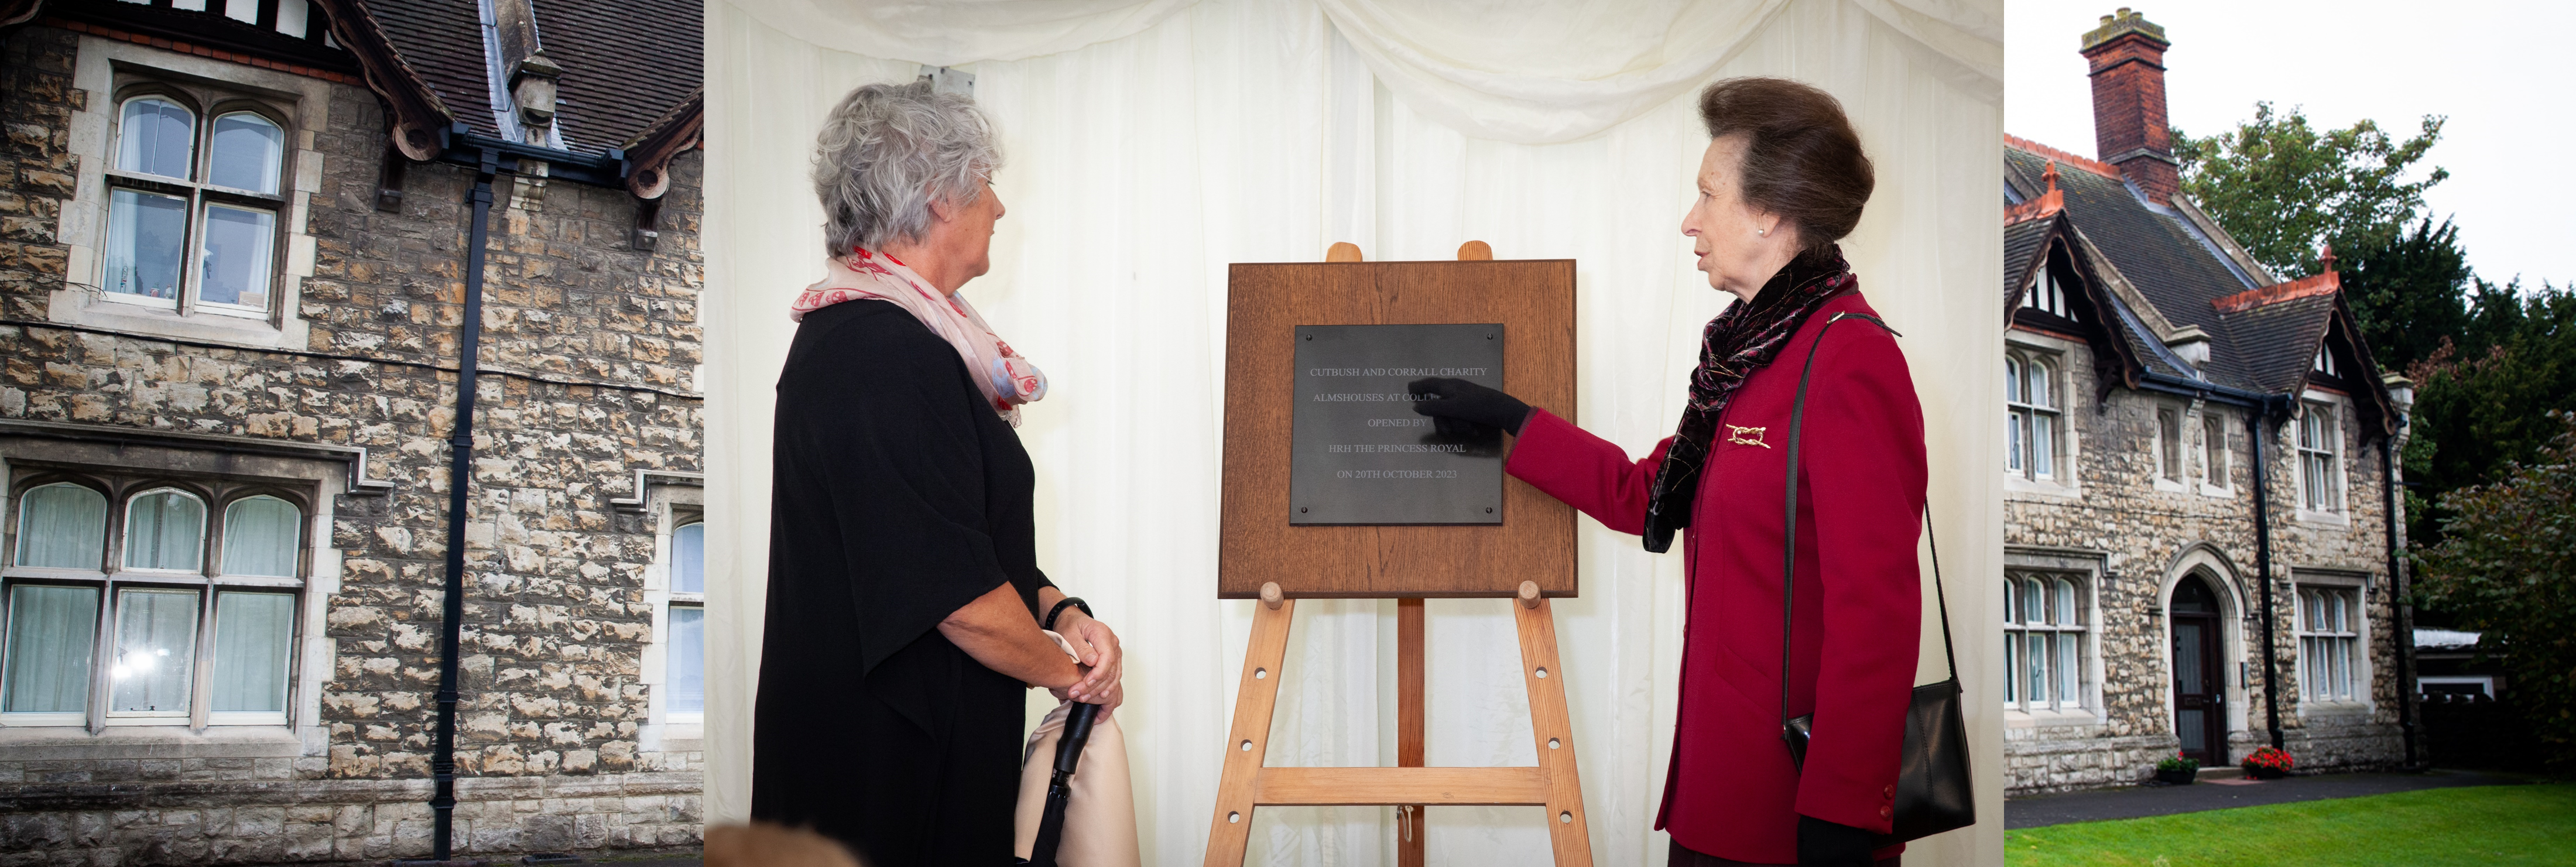 HRH The Princess Royal opens new homes at Cutbush and Corrall almshouses in Maidstone